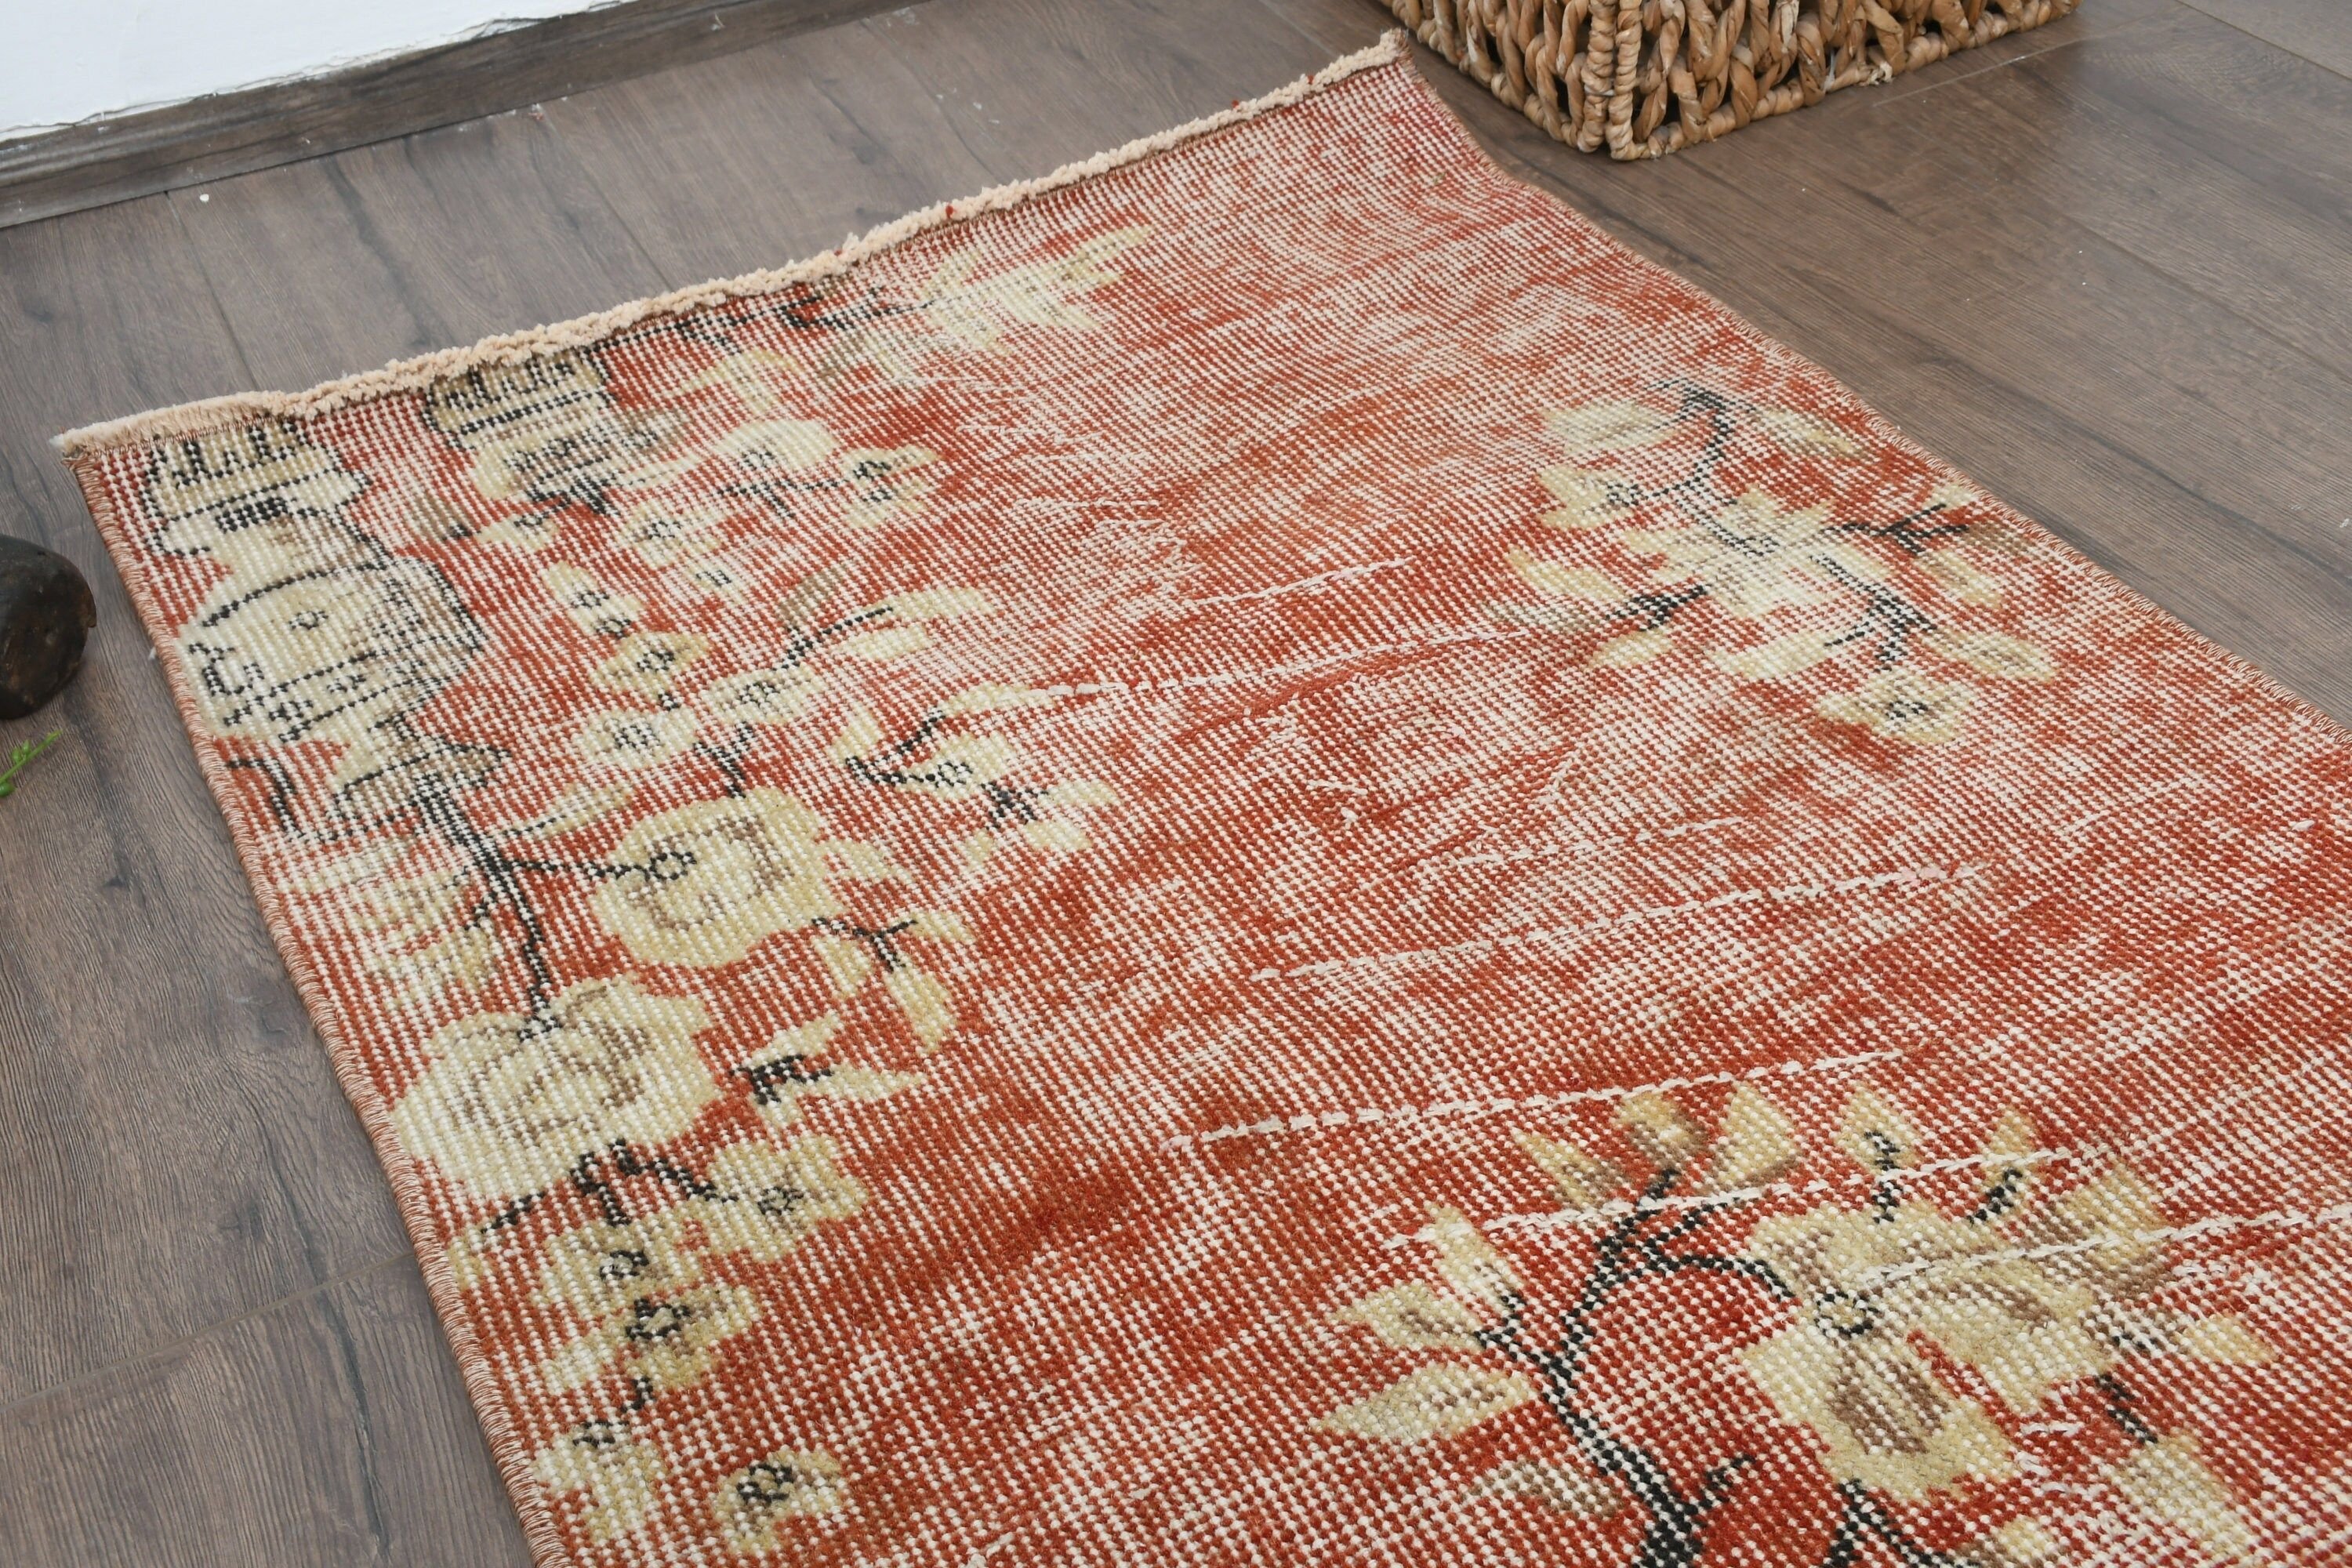 Moroccan Rugs, Red Antique Rug, 2.1x2.8 ft Small Rugs, Kitchen Rugs, Rugs for Kitchen, Turkish Rug, Entry Rug, Vintage Rug